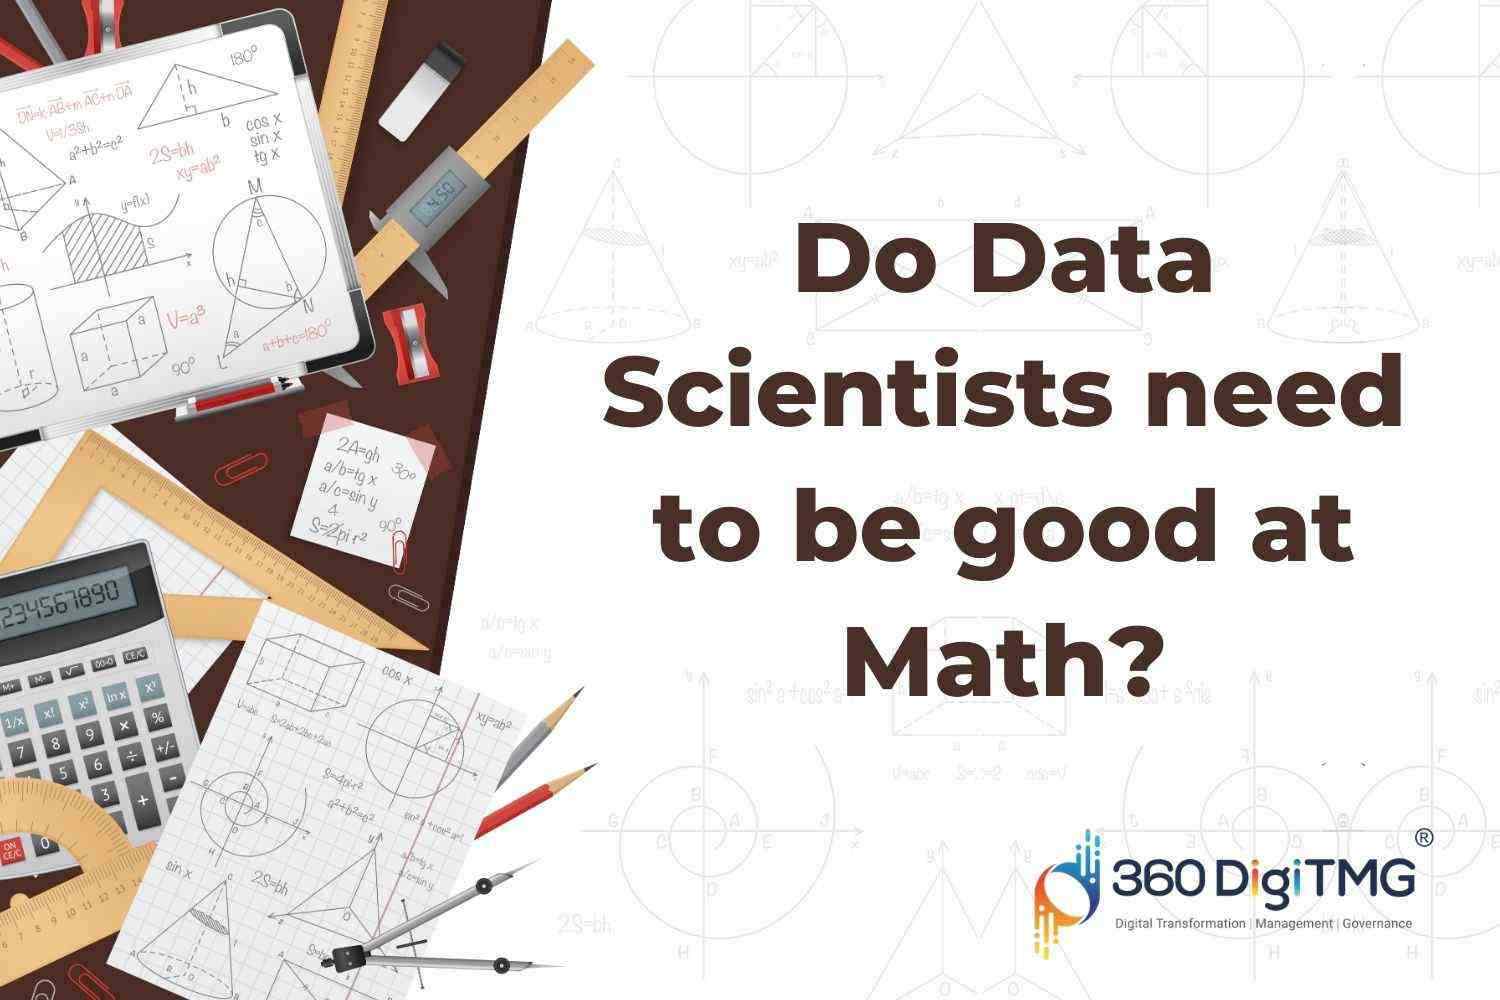 Do Data Scientists need to be good at Math?